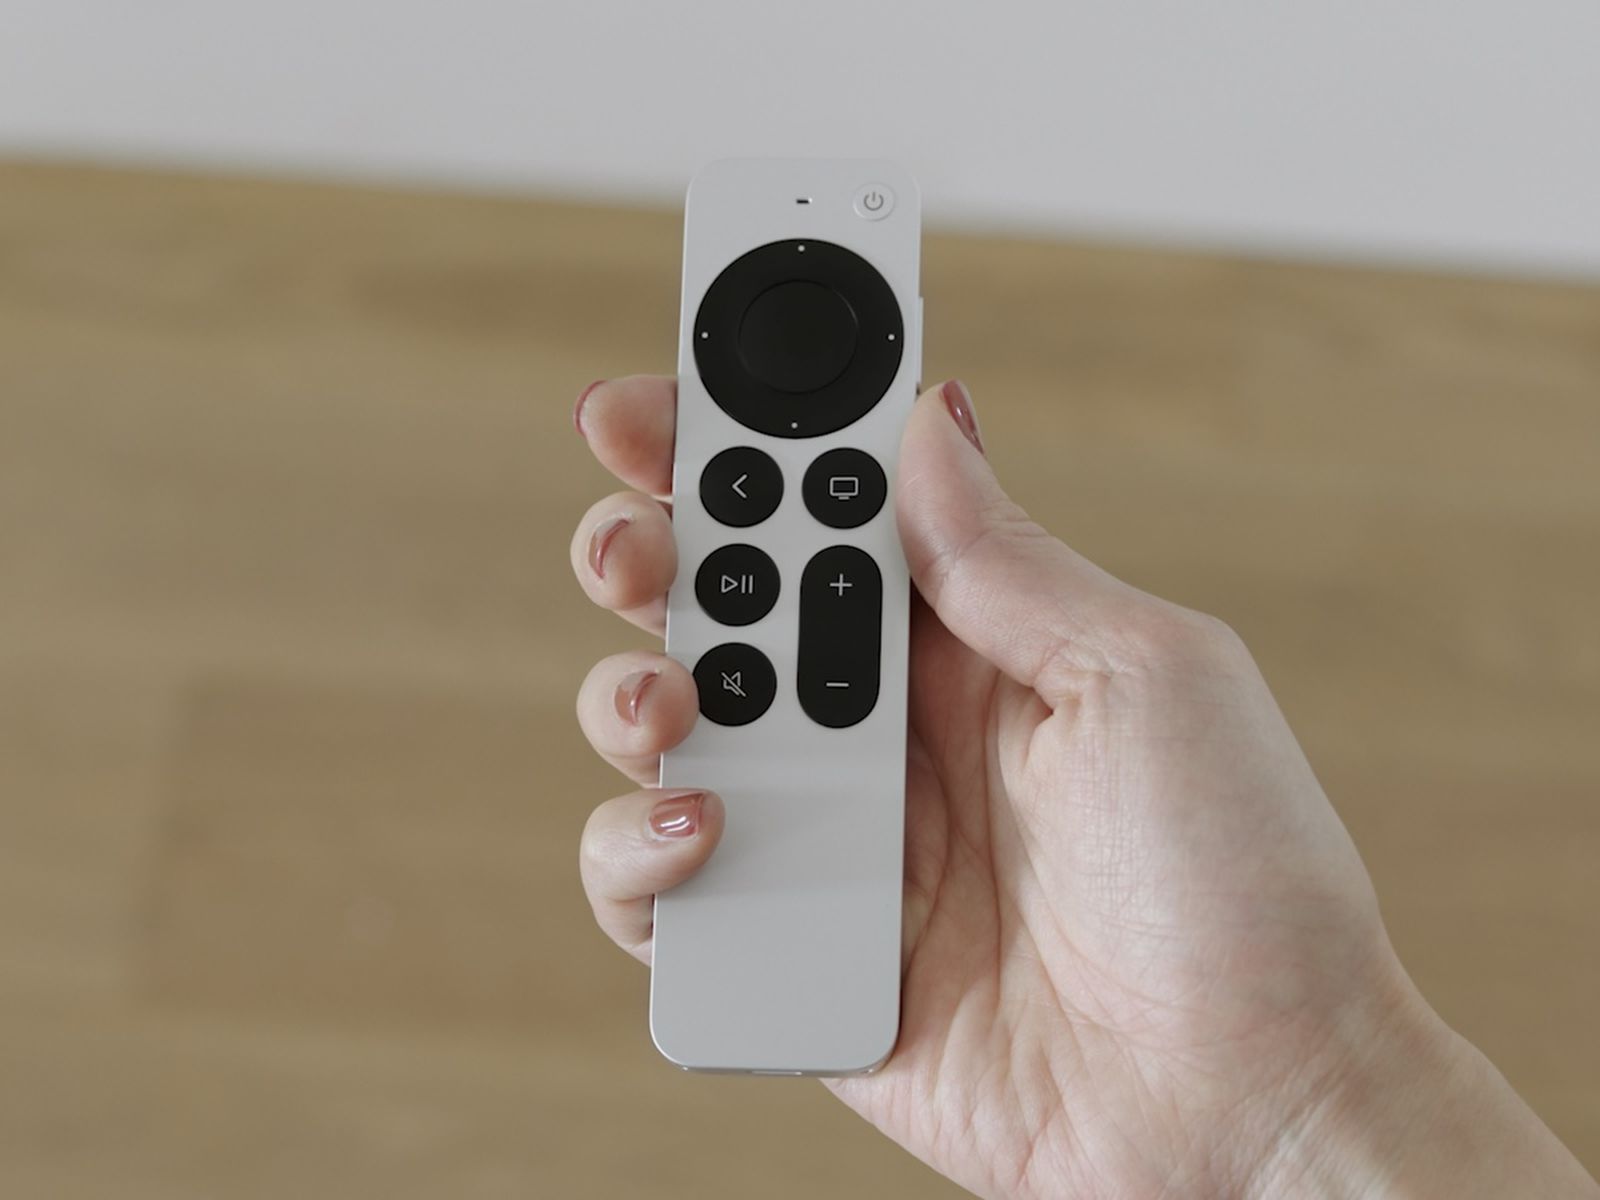 gentage Revisor Recite New Apple TV Ships With Redesigned Siri Remote, Also Sold Separately for  $59 - MacRumors